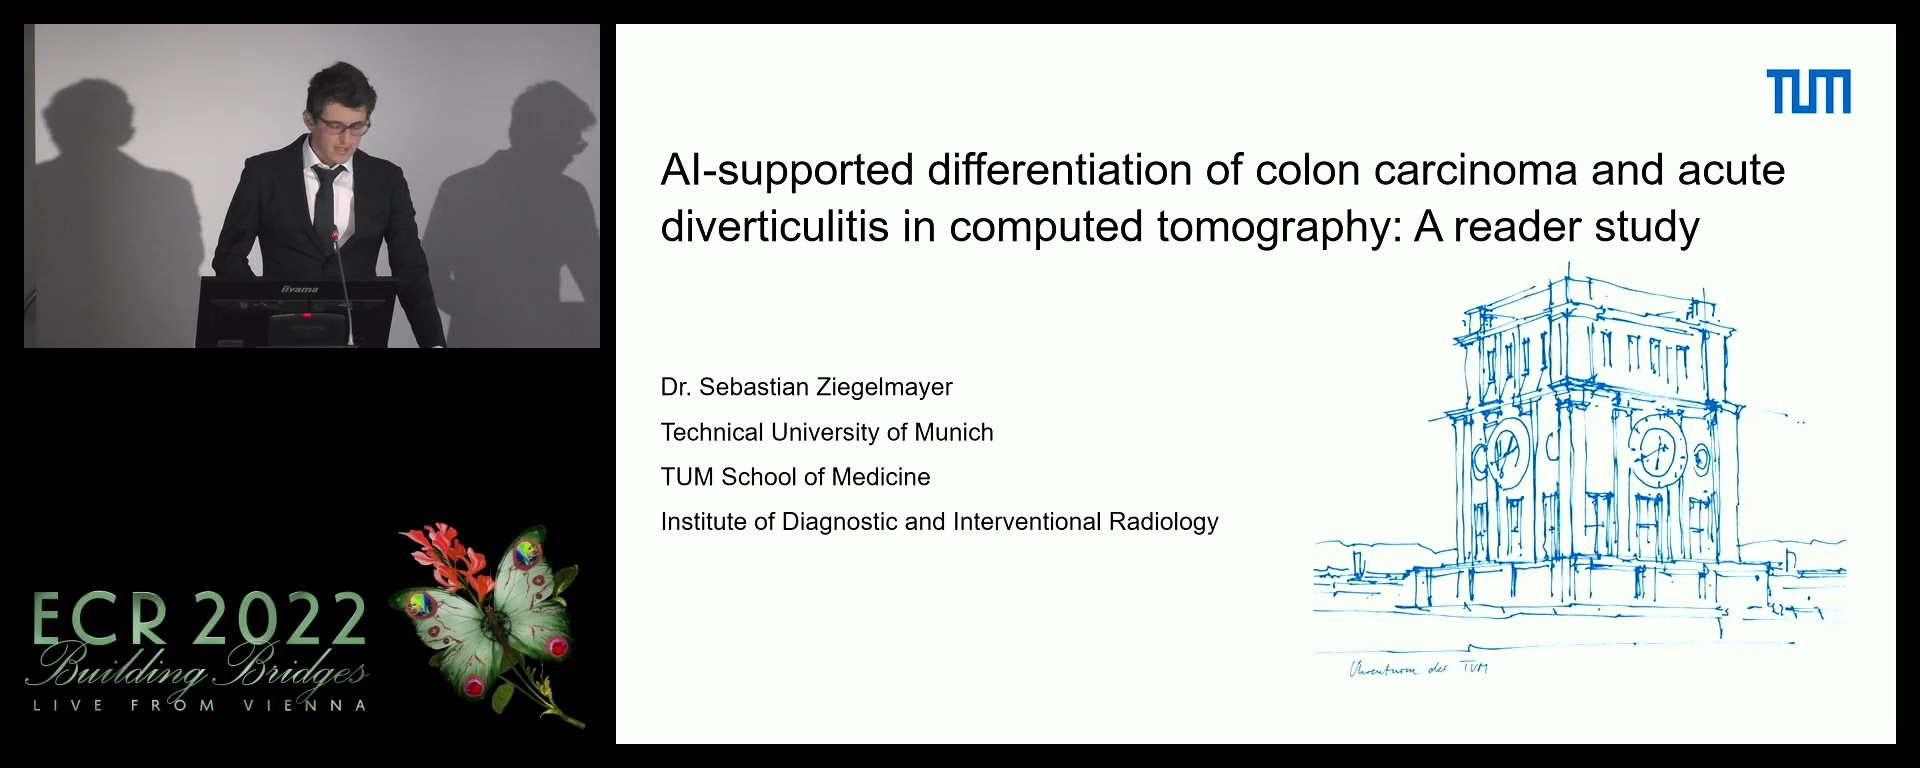 Artificial intelligence support system to improve the diagnostic accuracy of radiologist in differentiating colon carcinoma and diverticulitis in computed tomography - Sebastian Ziegelmayer, München / DE